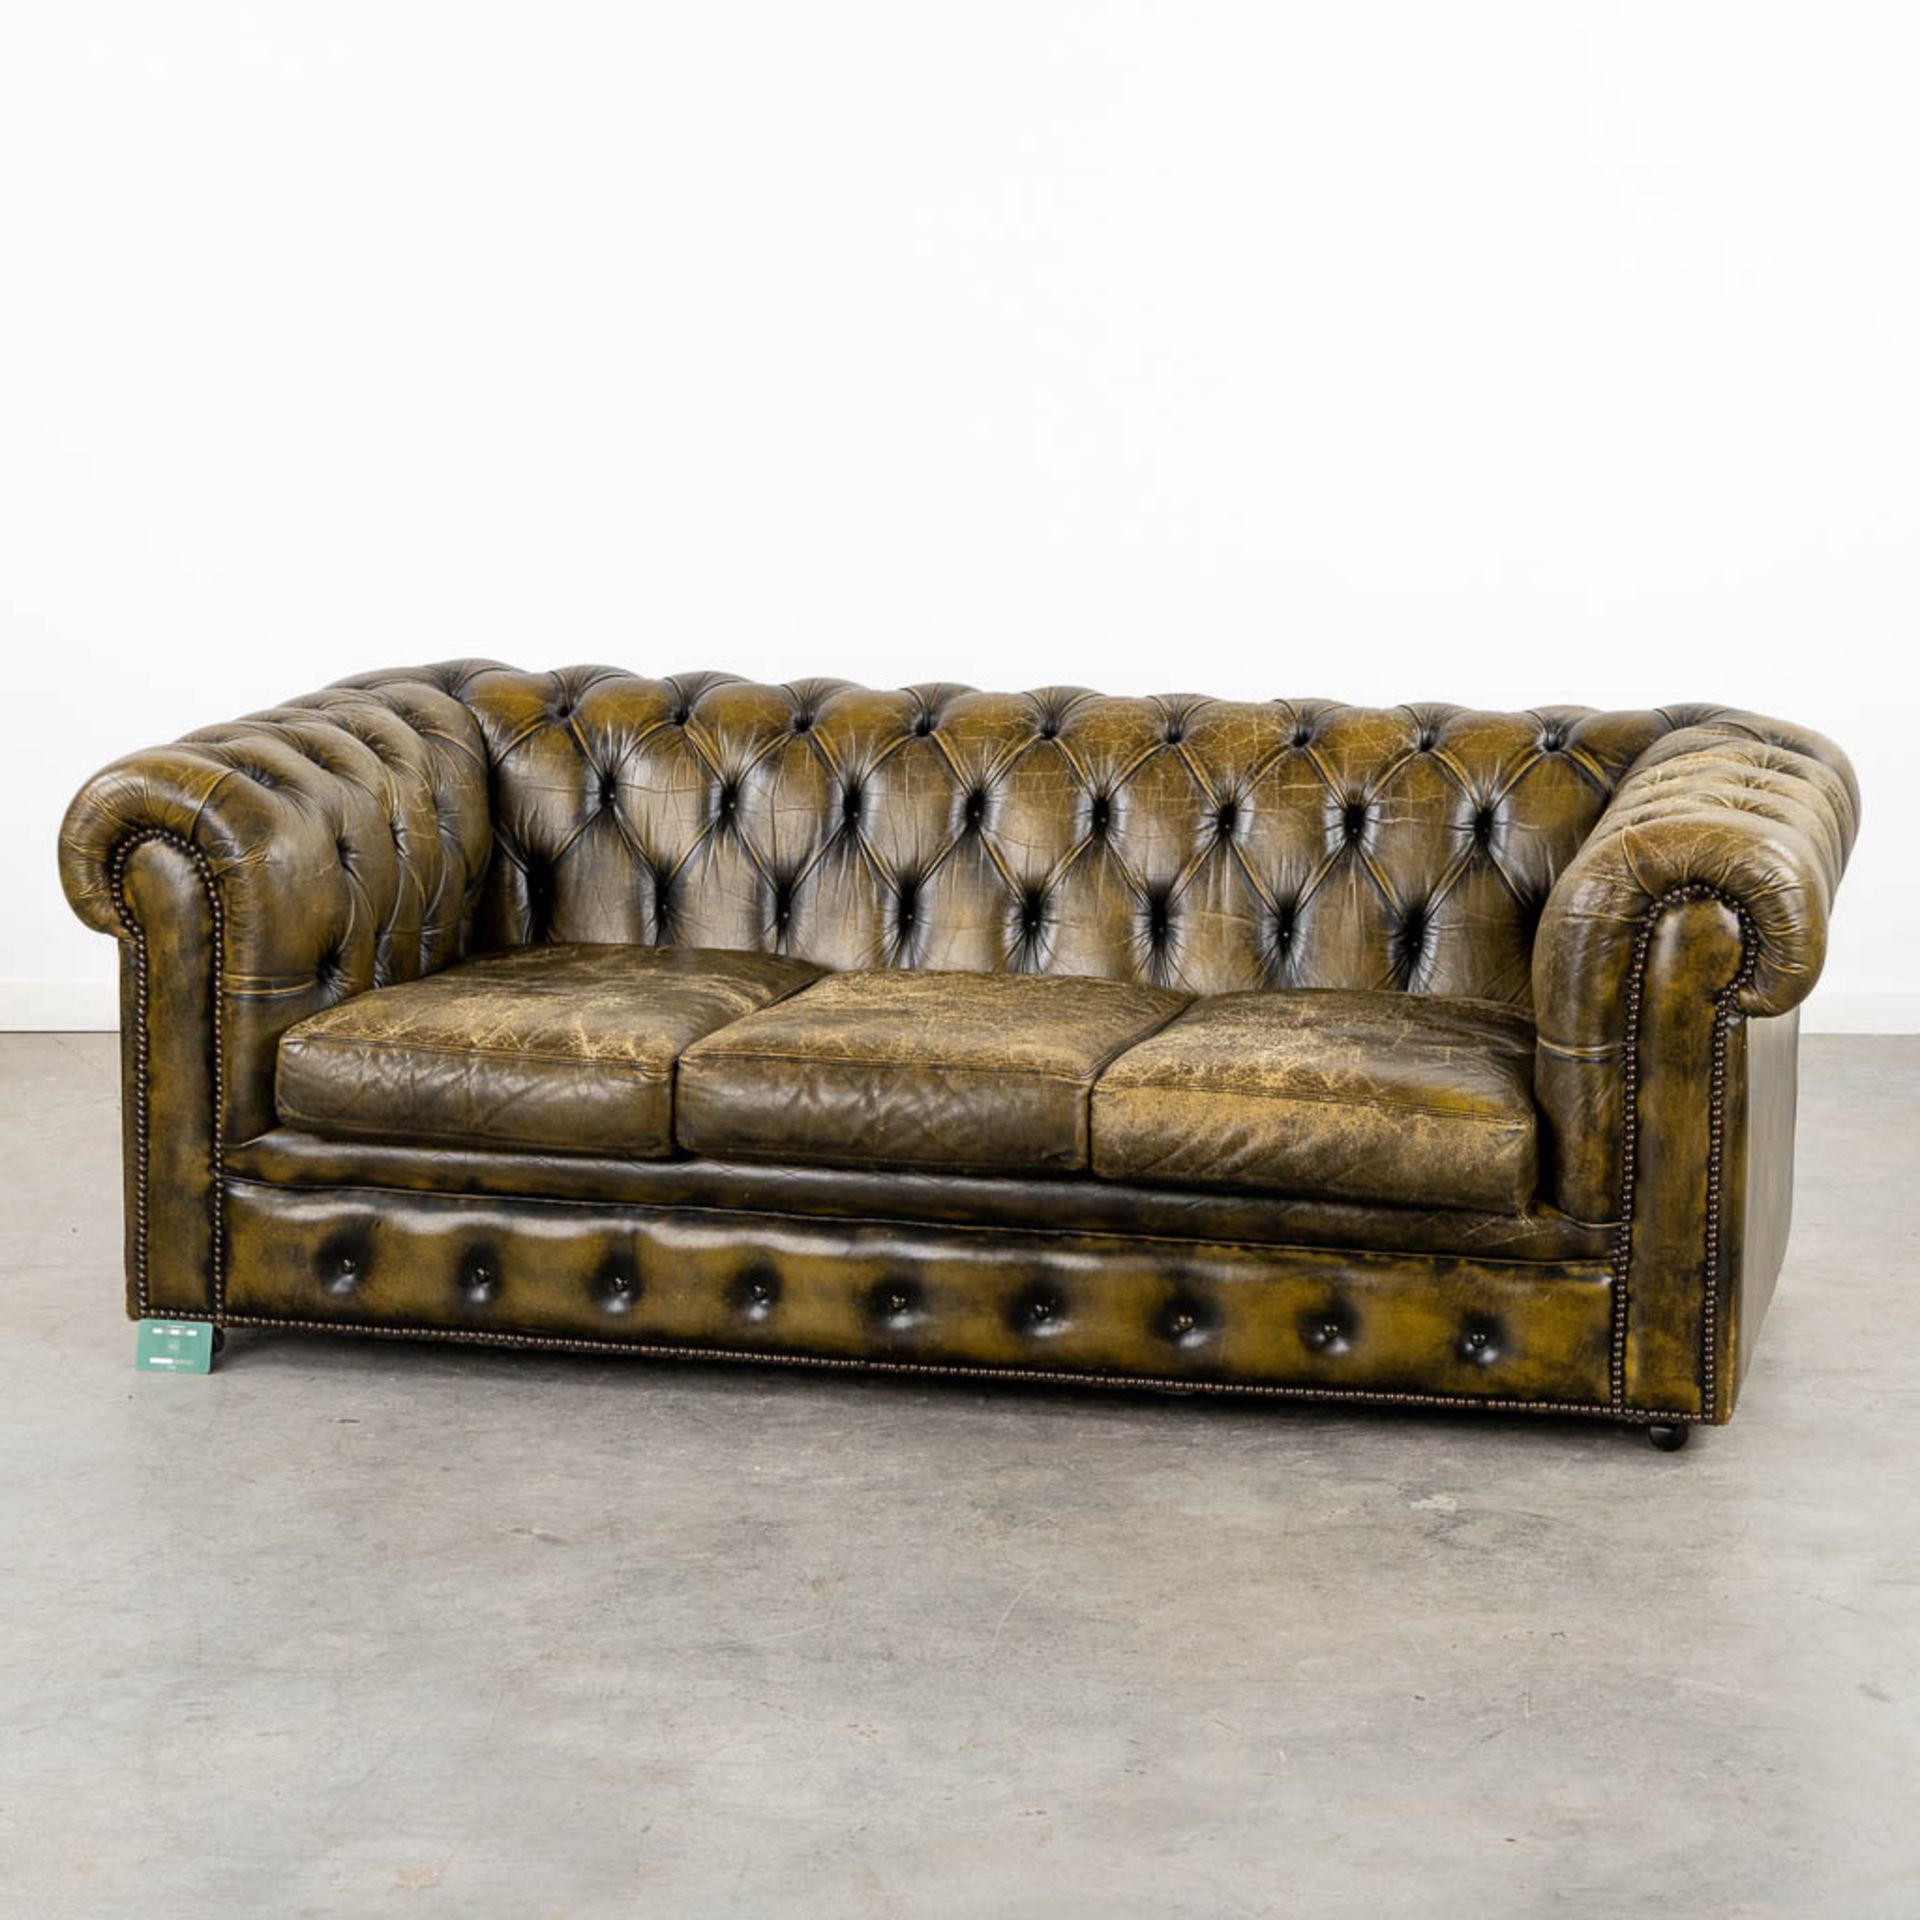 A Chesterfield three-person, green leather sofa. (L:90 x W:188 x H:68 cm) - Image 2 of 13